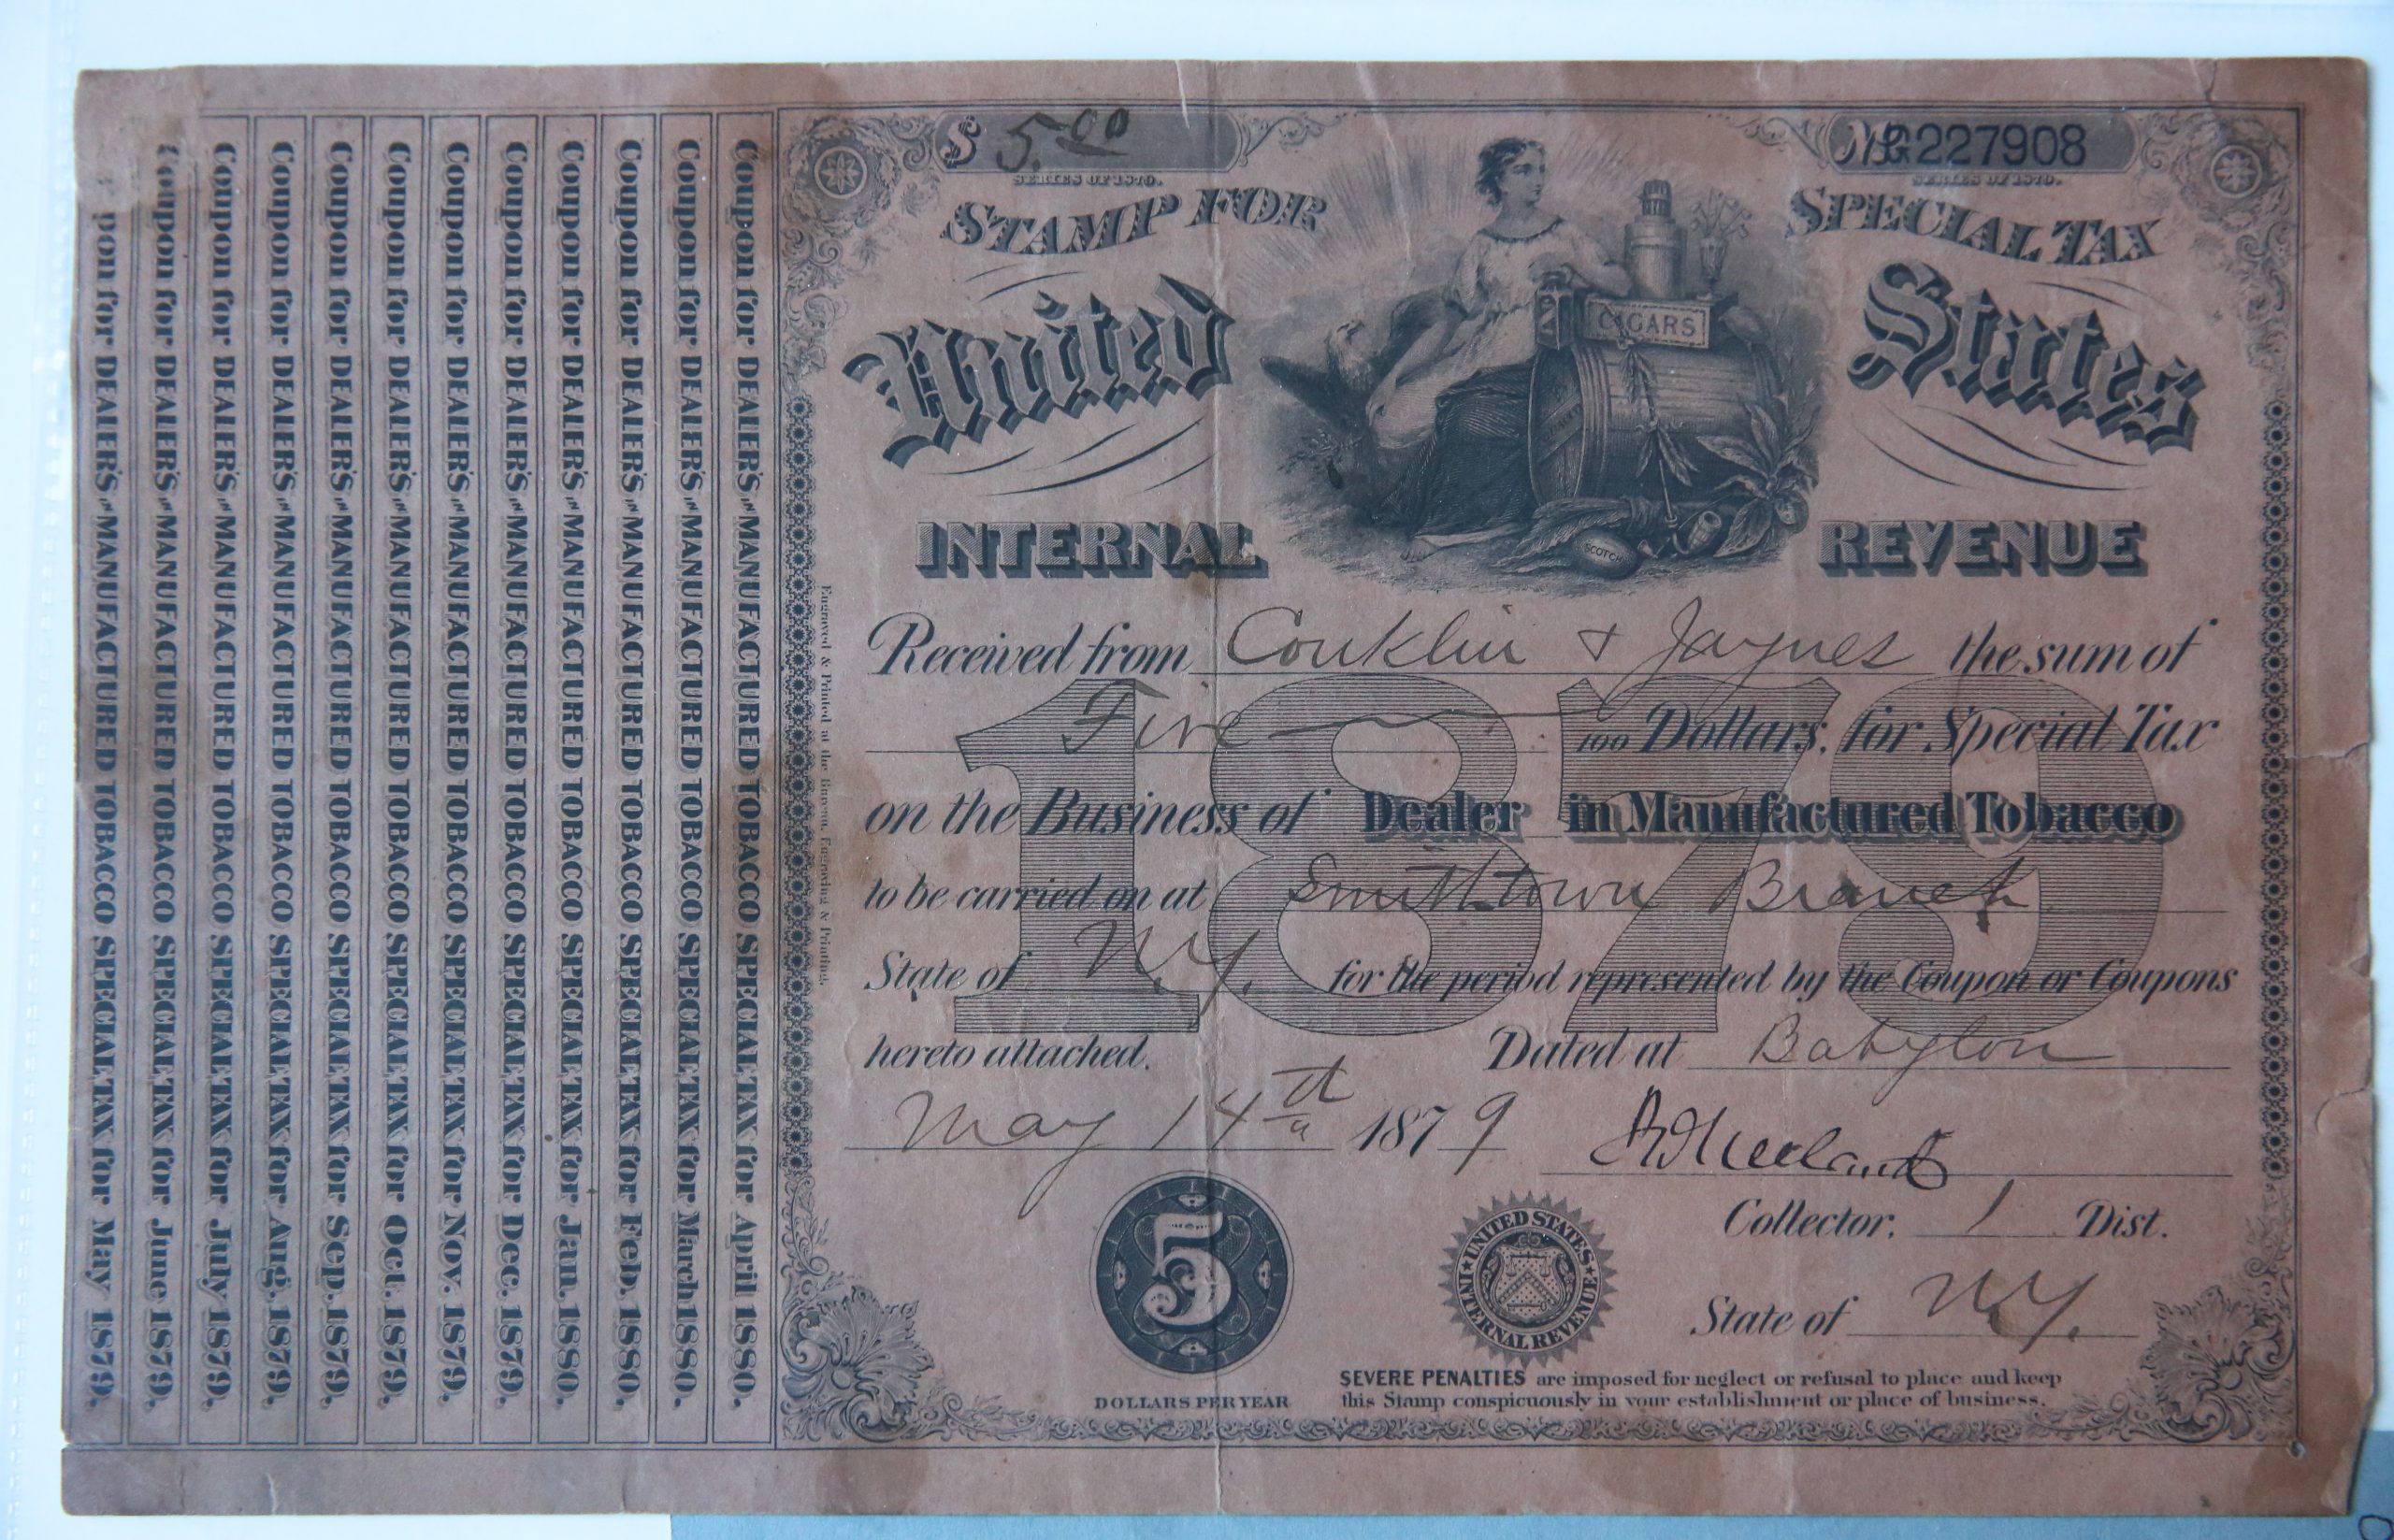 Stamp for special tax United States Internal Revue received from (...) on the business of dealer in Manufactured Tobacco dated Babylon, May 14th 1879, state of NY.